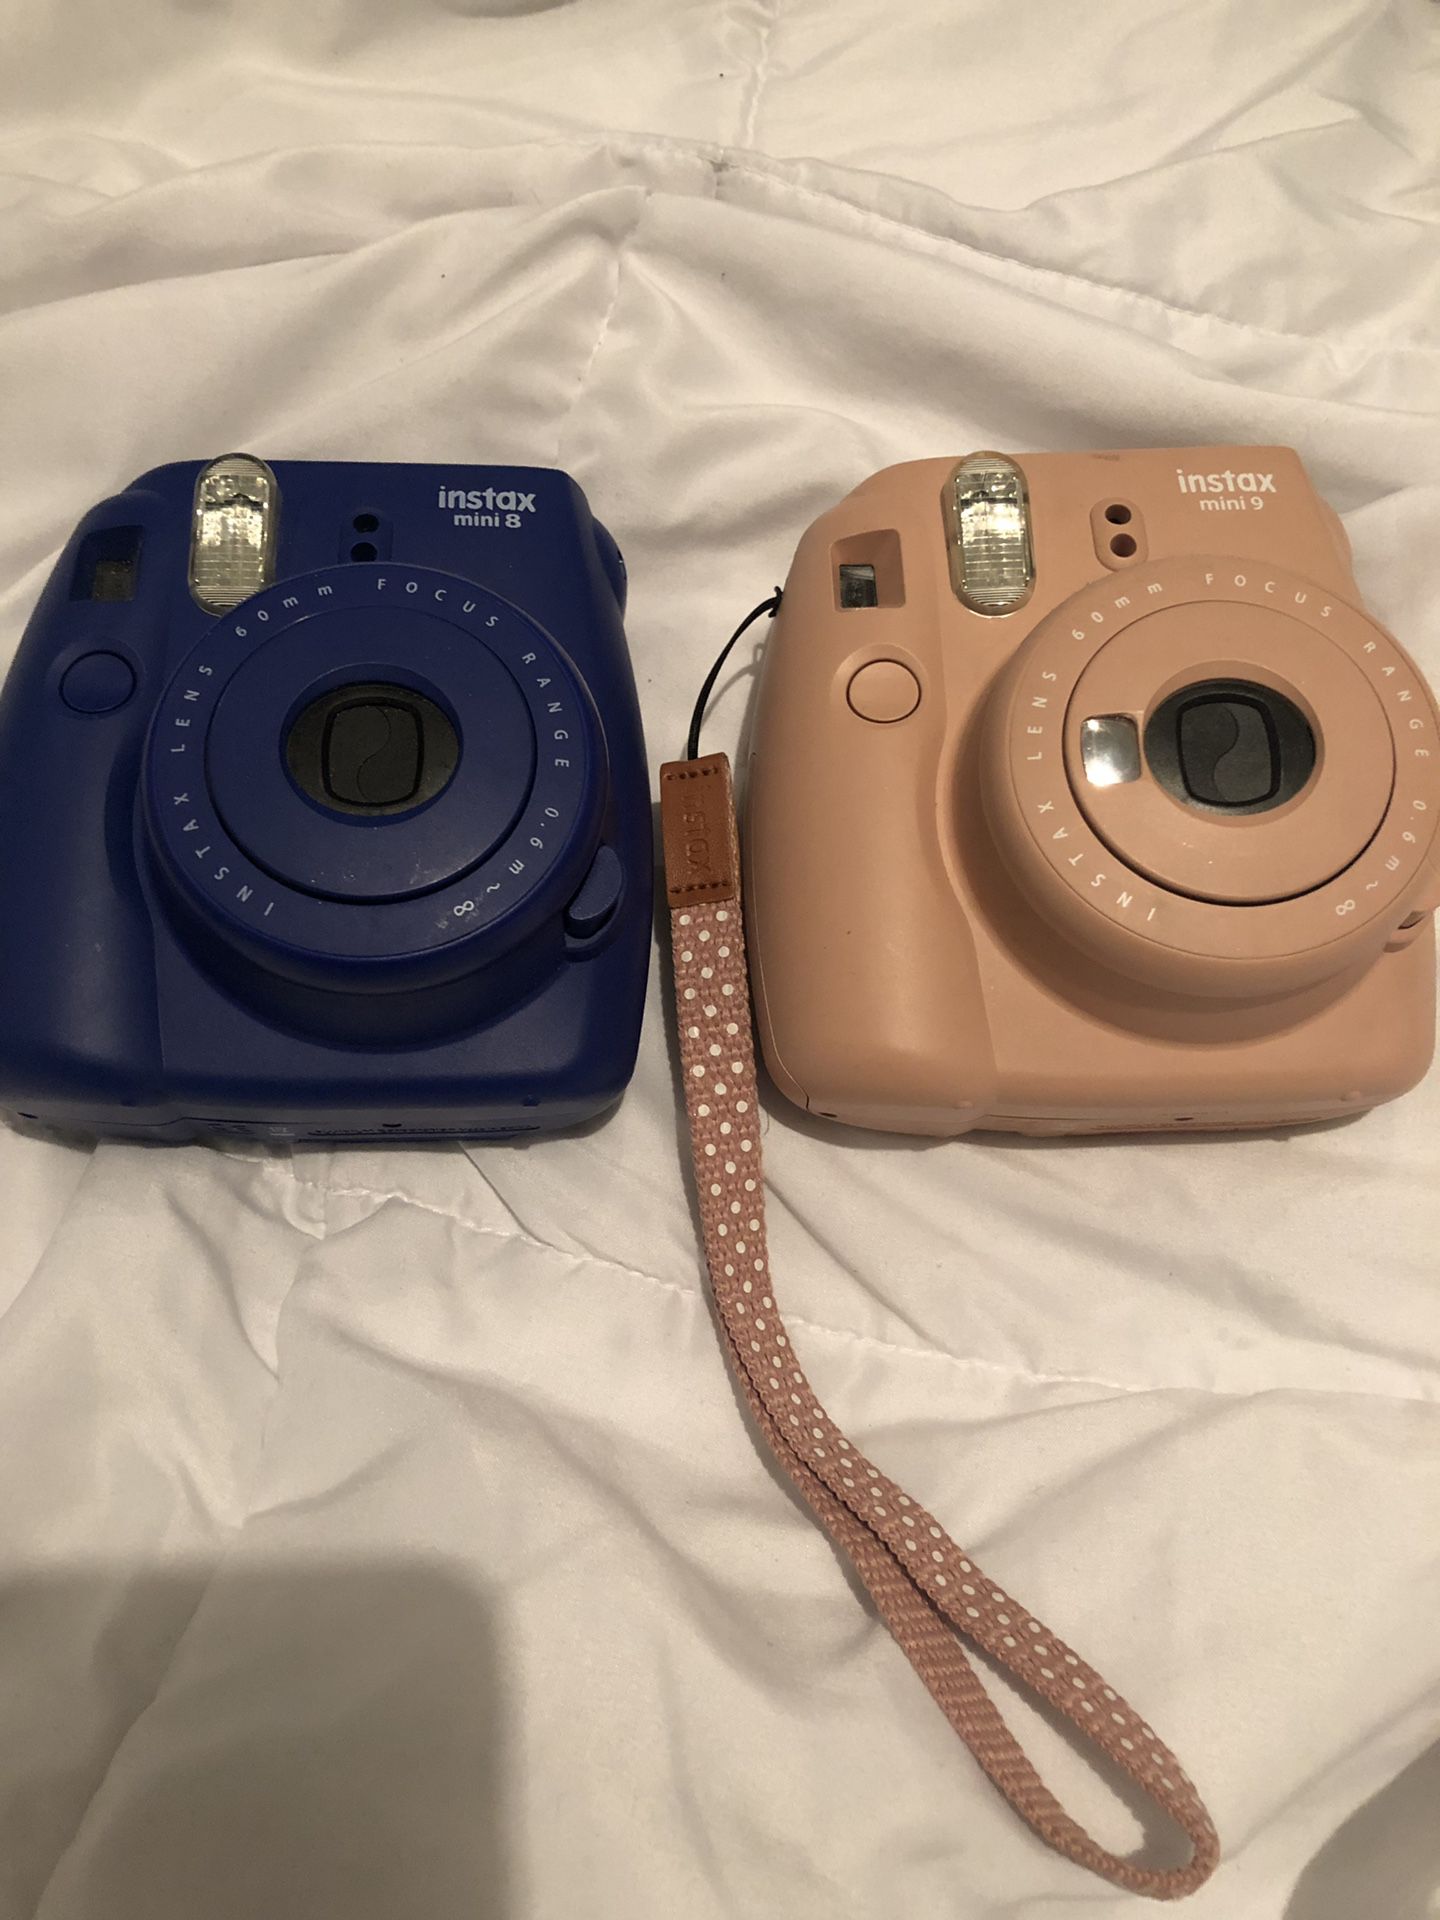 Instax mini 8 and 9 cameras